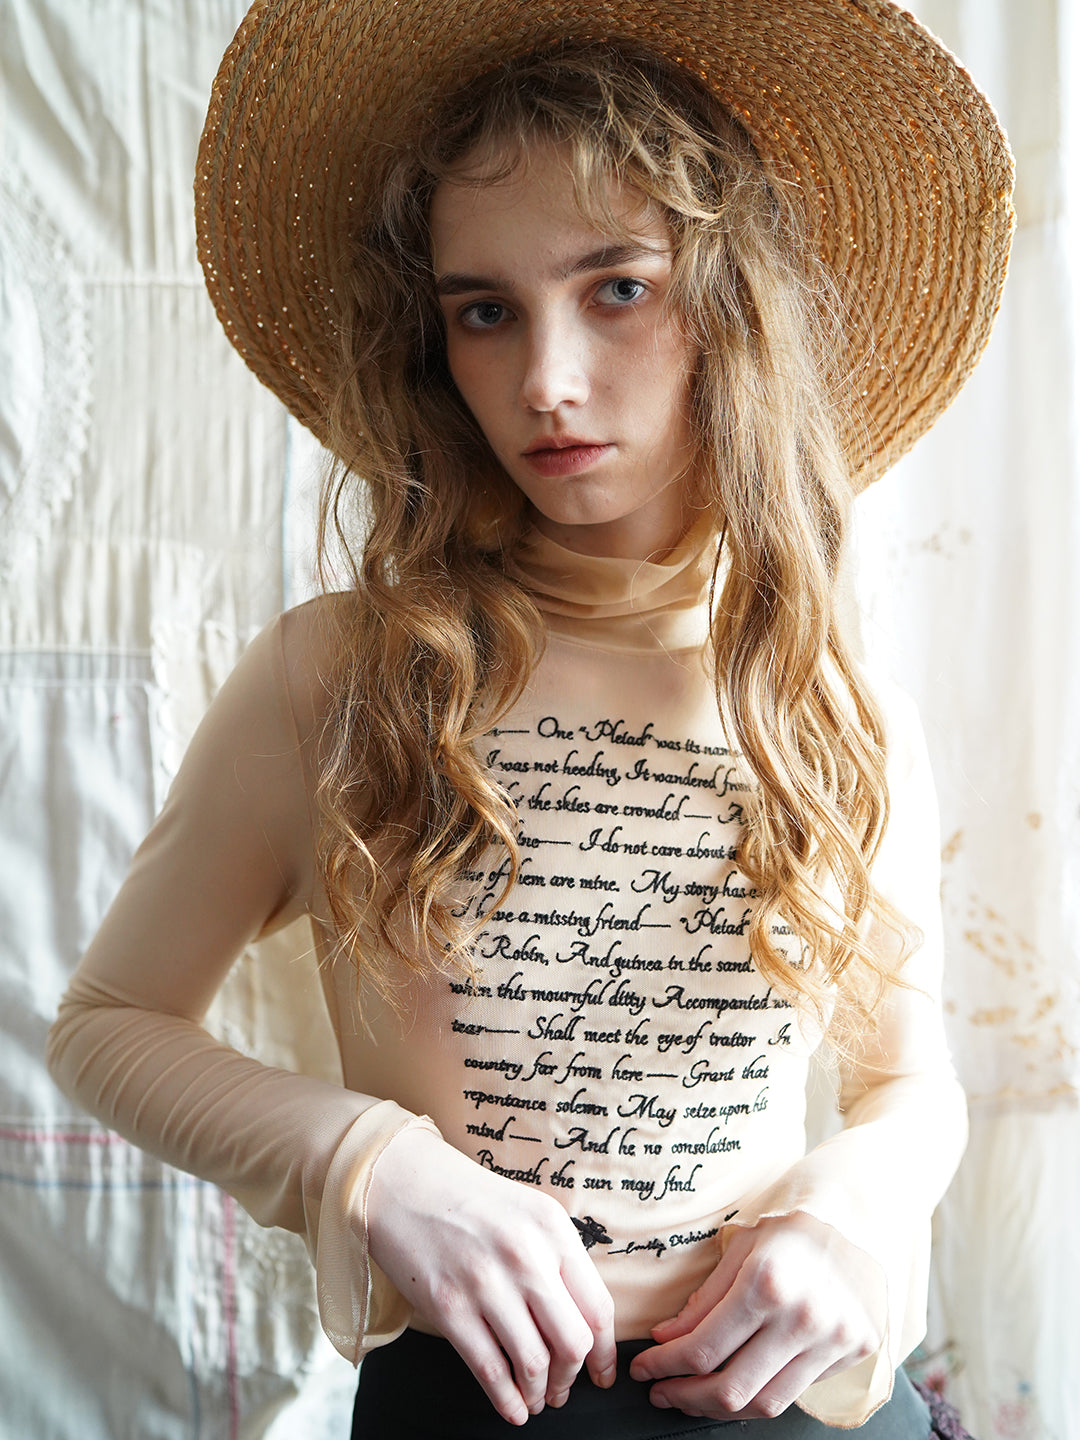 Unlogical Poem Poetry-embroidered Mesh Bottoming Shirt